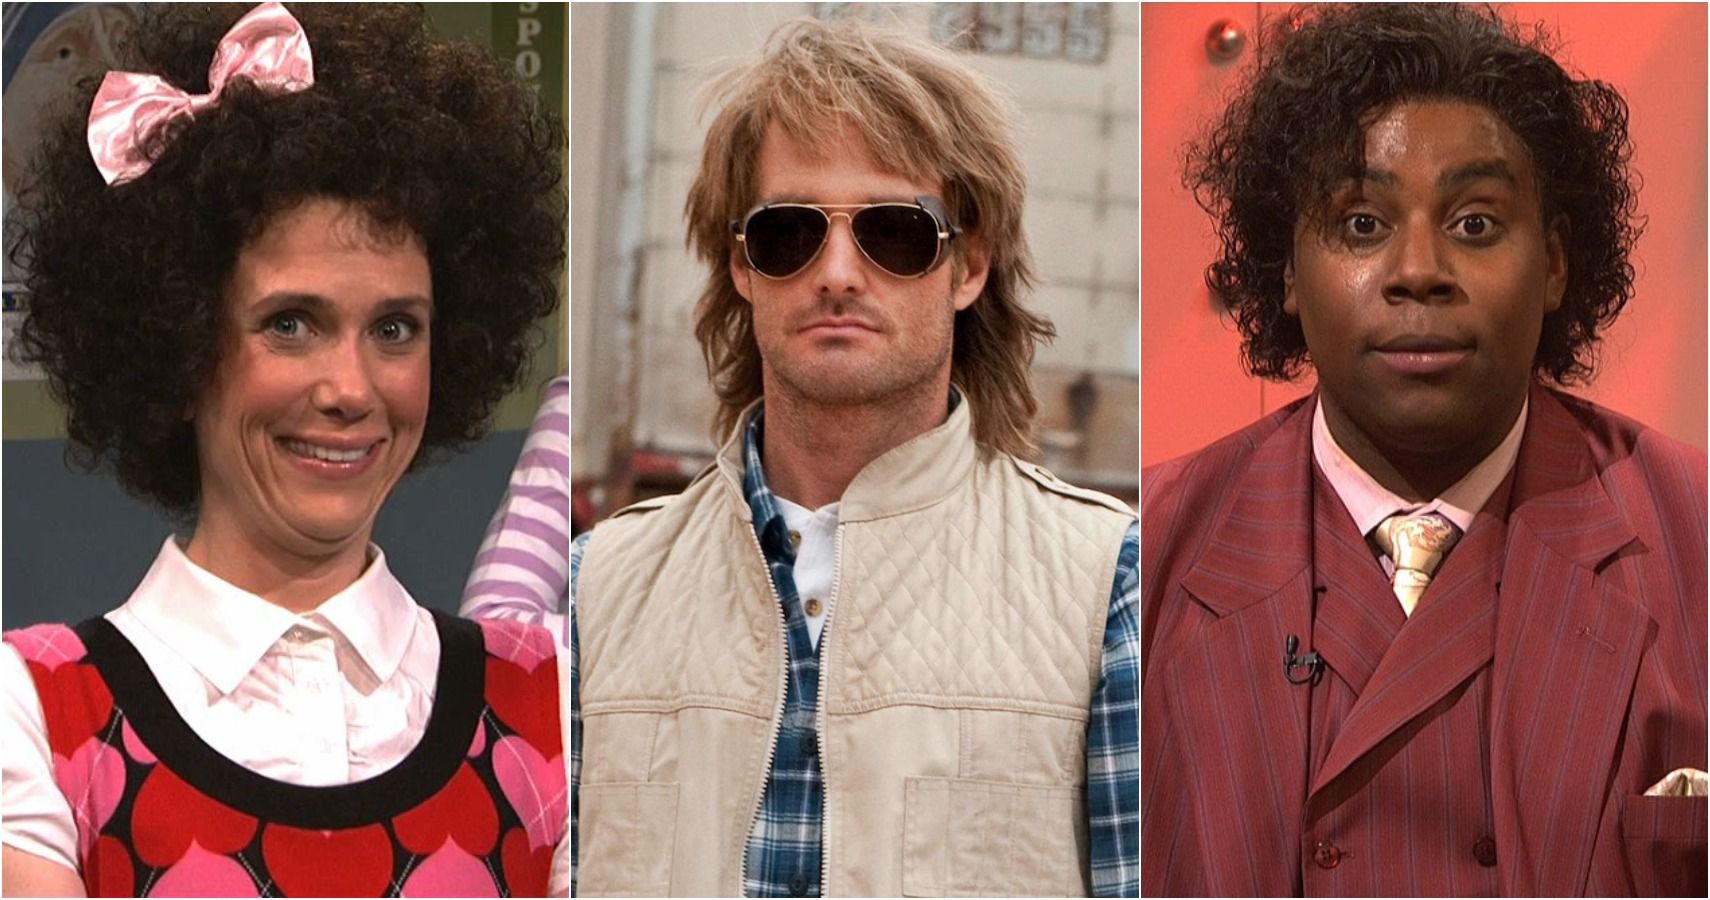 The 17 Best SNL Sketches of Season 48